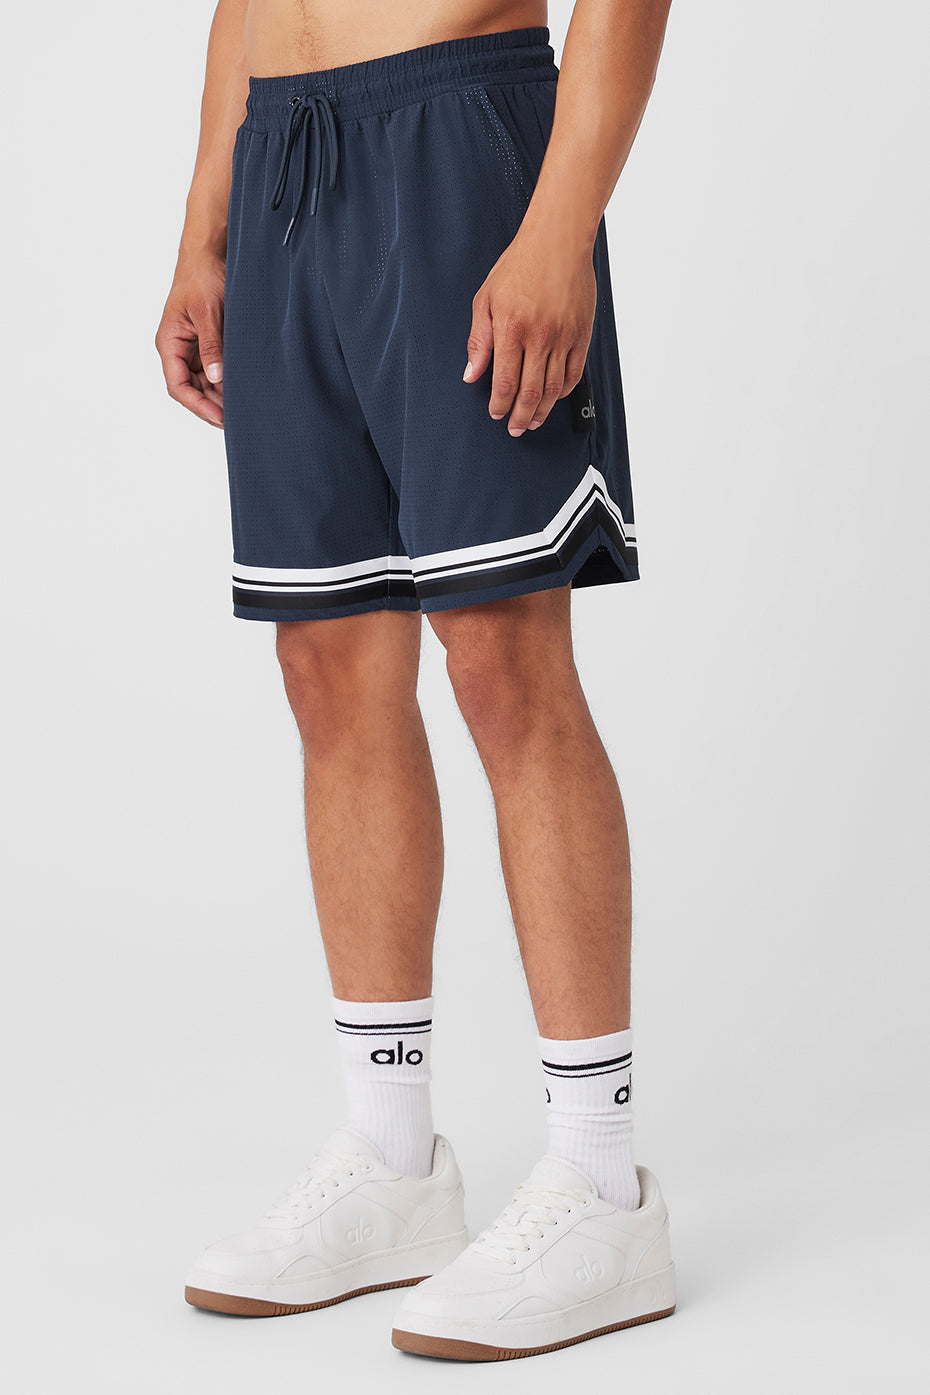 9' Traction Arena Short - Navy